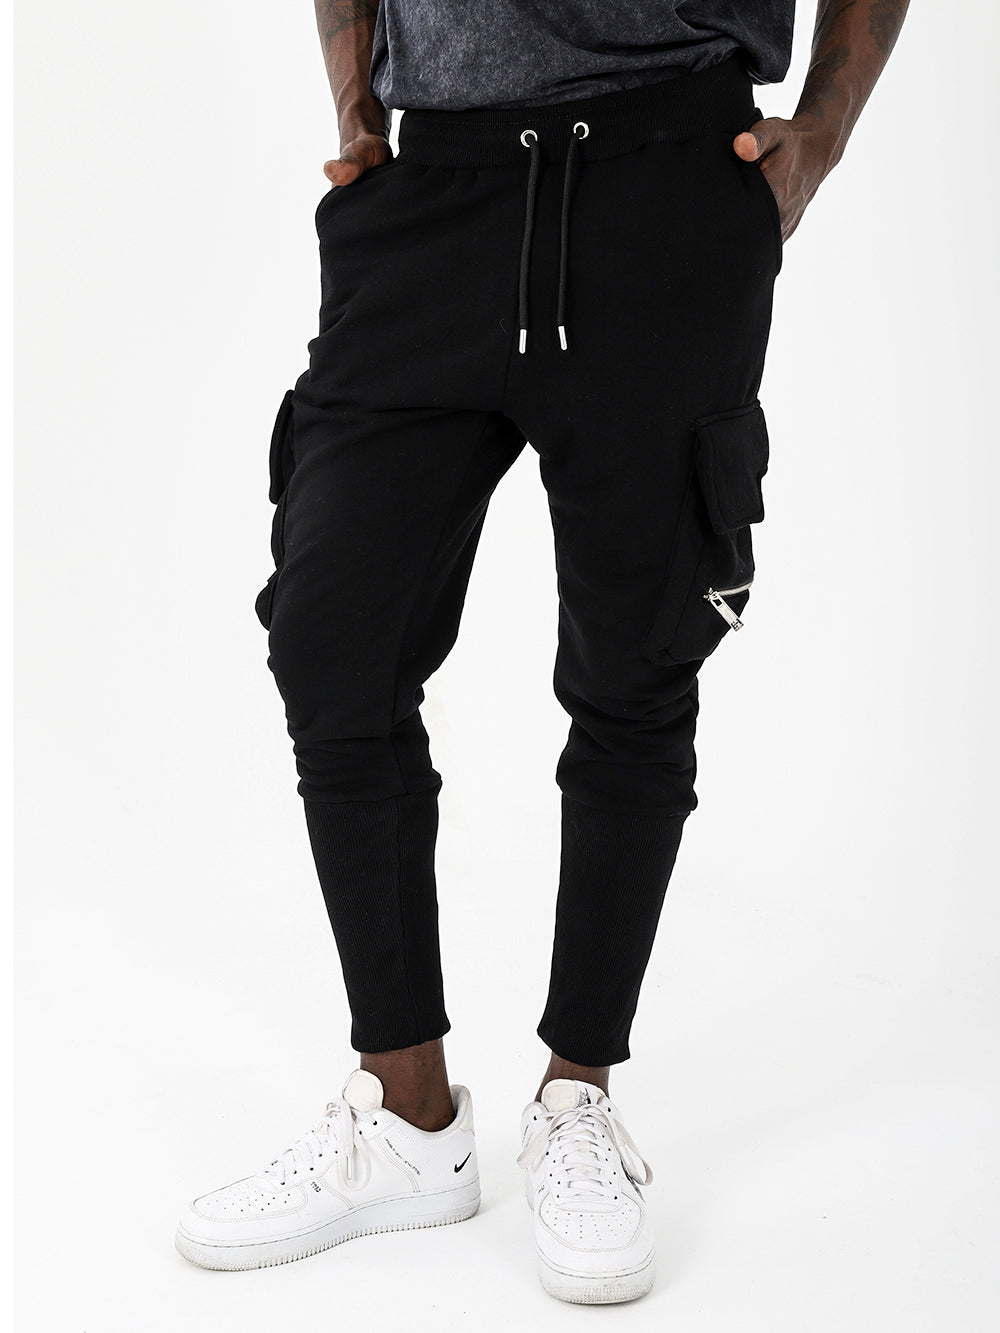 A man wearing comfortable black RAMBO JOGGERS cargo pants with plenty of pockets, paired with white sneakers.